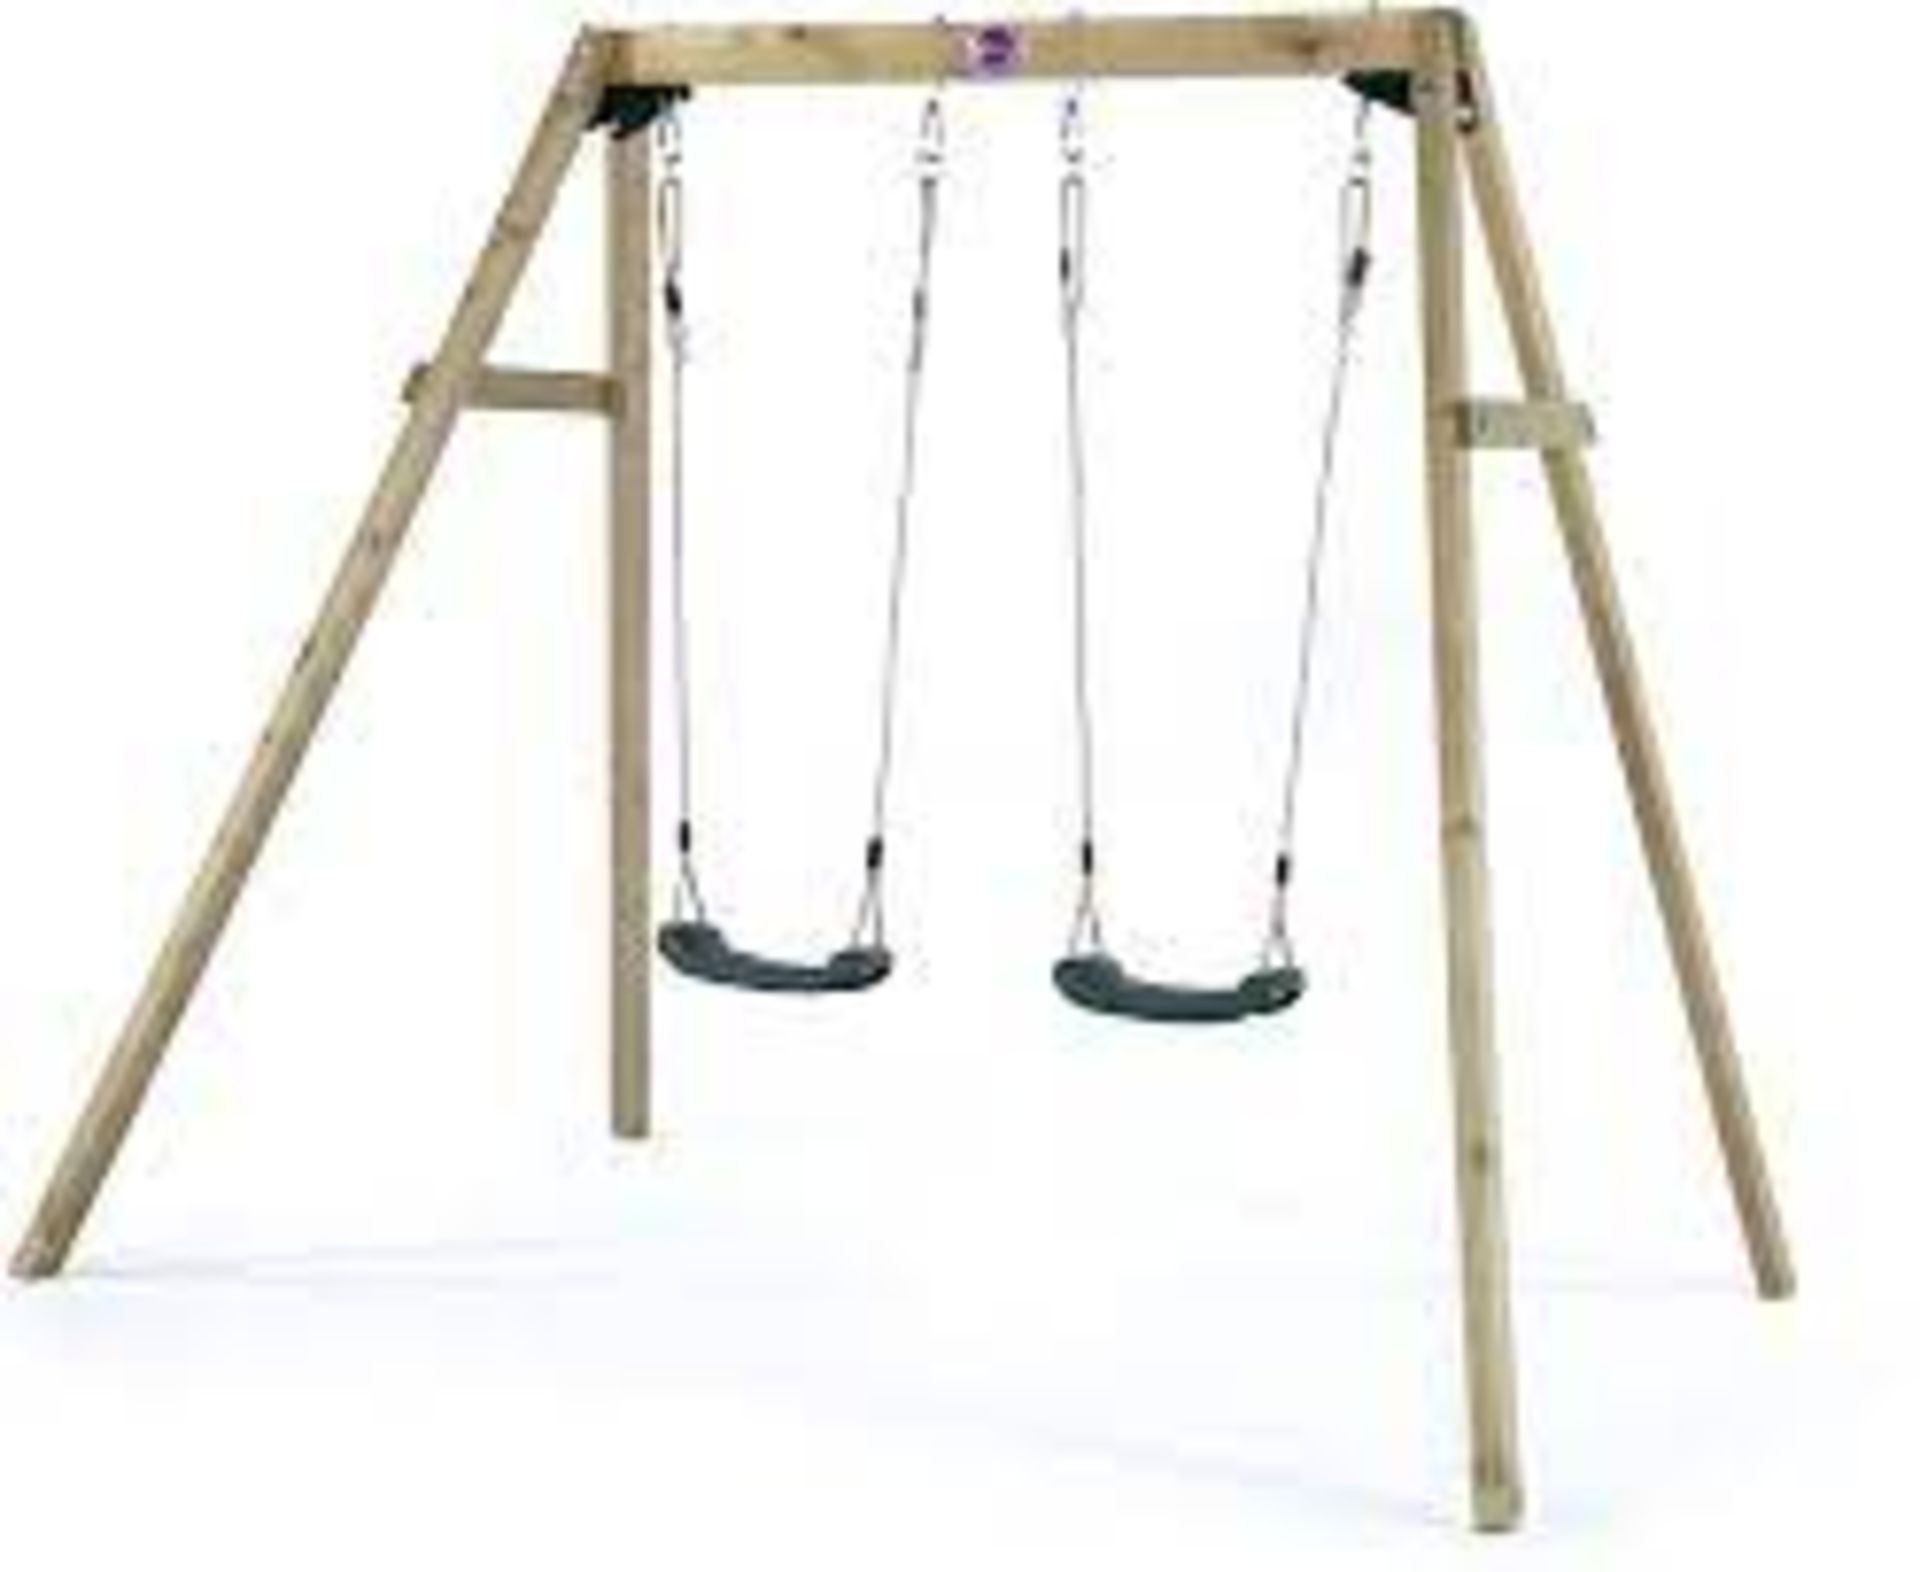 PLUM DOUBLE SWING SET, DOUBLE THE SEATS AND TWICE THE FUN. GREAT FOR OUTDOOR PLAY AND EXERCISE